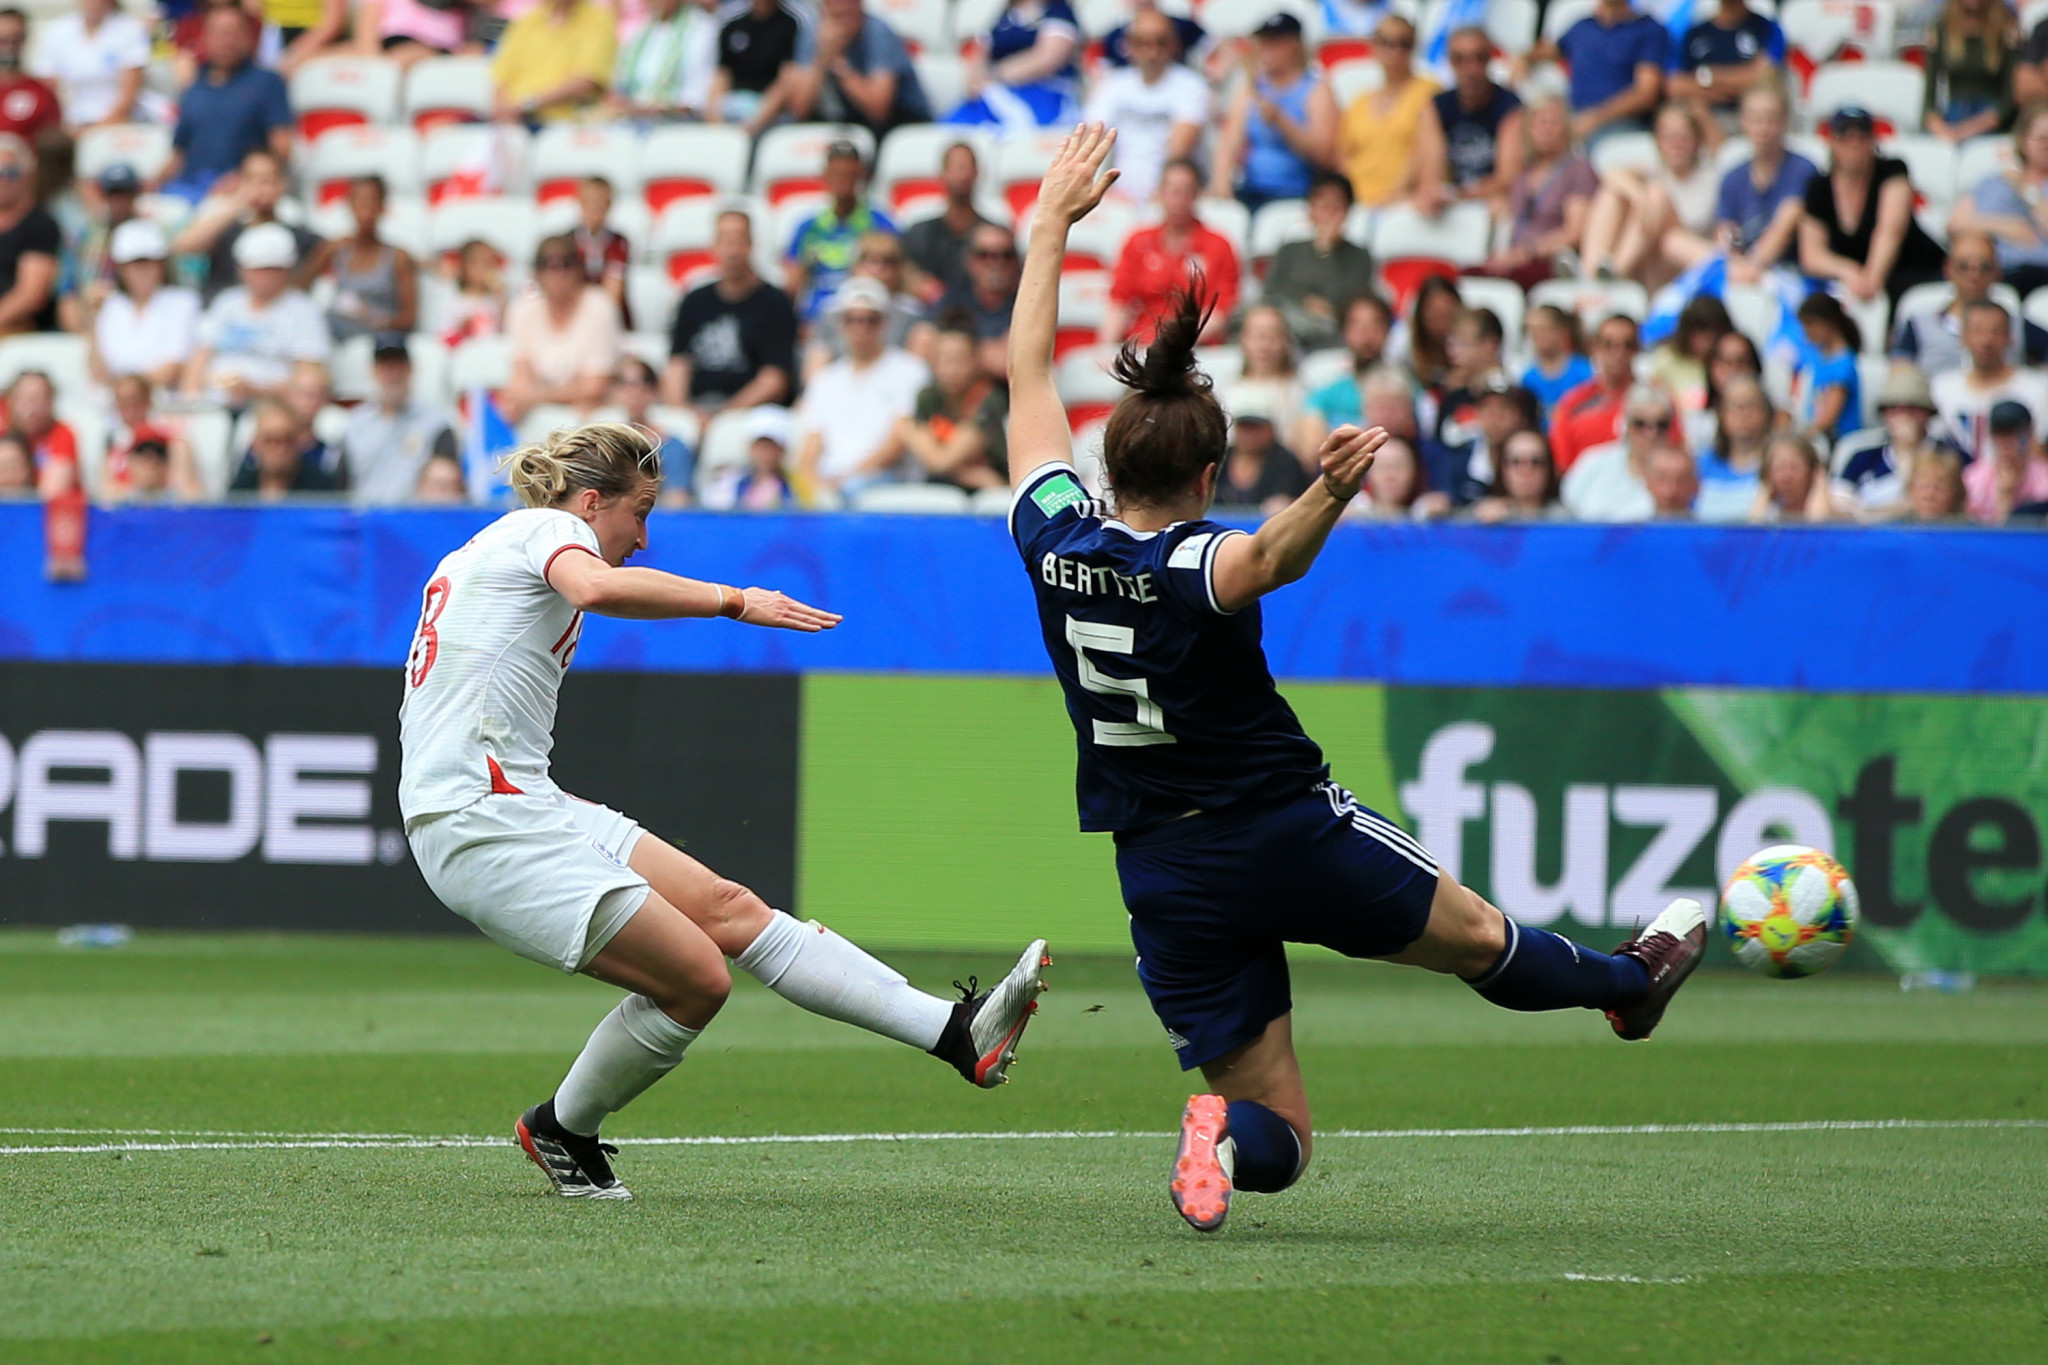 Ellen White, having previously been denied a goal by the offside flag, pounced on a loose ball to curl in a second for England ©Getty Images